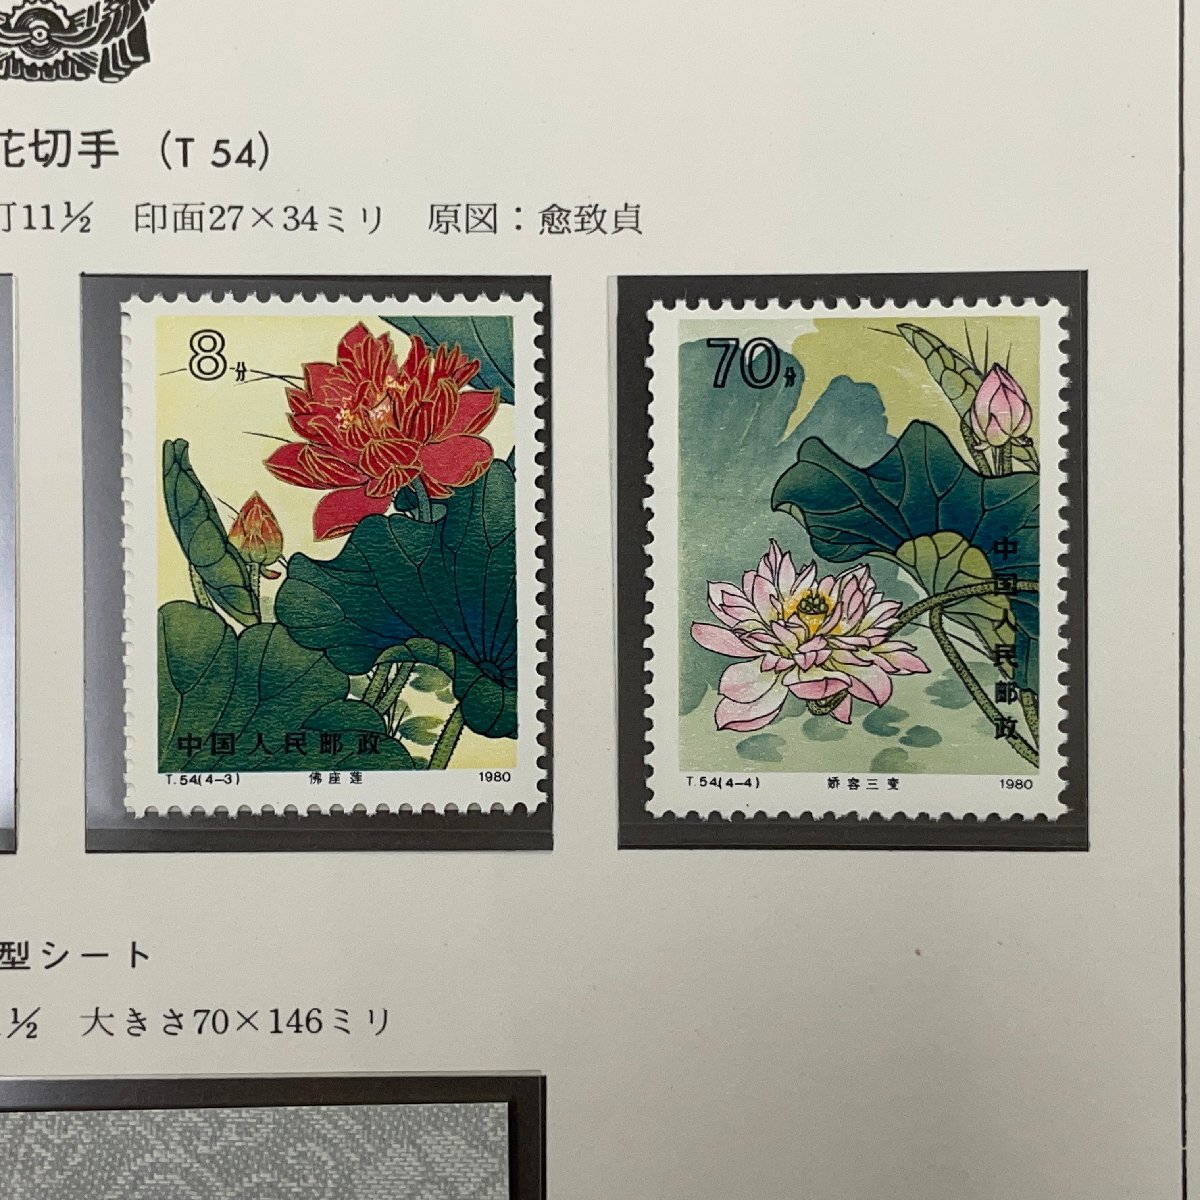 m002 C3(60) 29 China stamp 1 jpy ~ storage goods China stamp 1980 T54 lotus. flower 4 kind . small size seat Boss to-k leaf attaching 